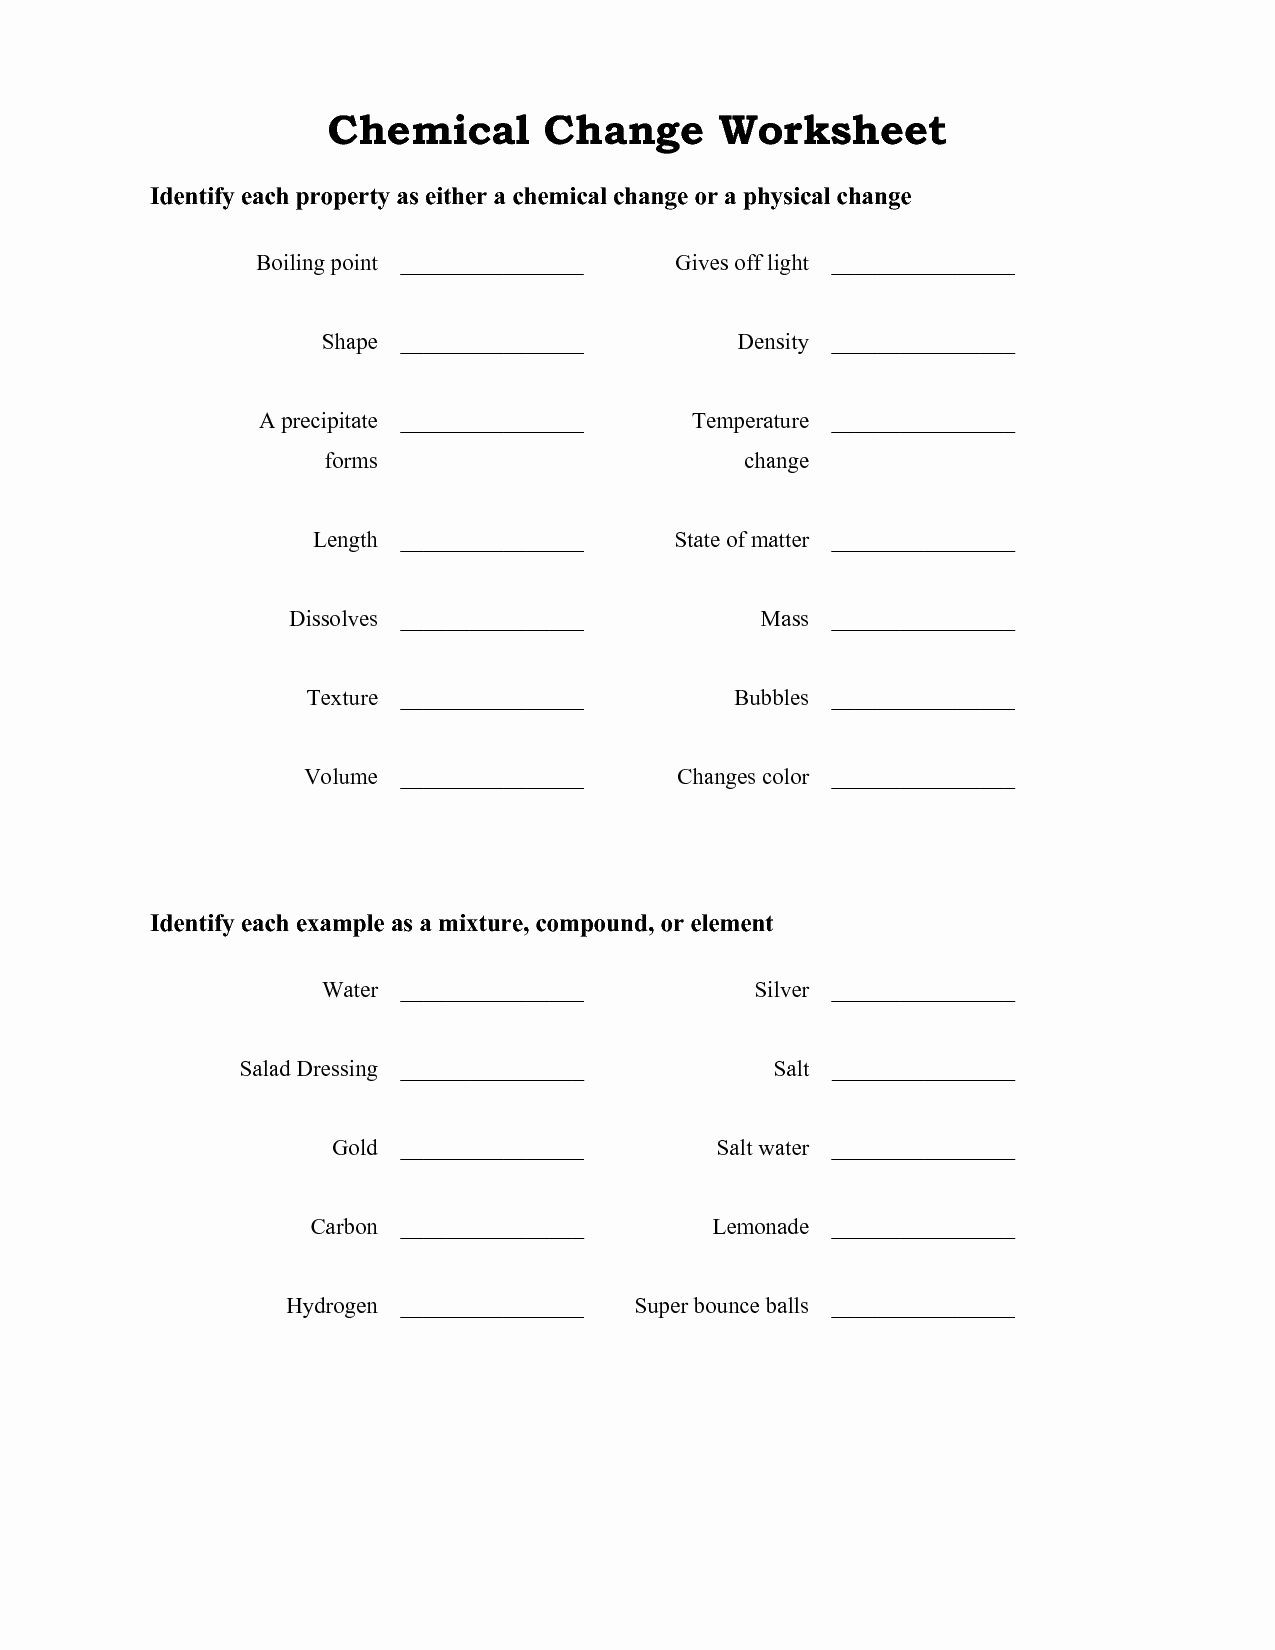 Chemical and Physical Change Worksheet Chemical and Physical Change Worksheet Inspirational 14 Best